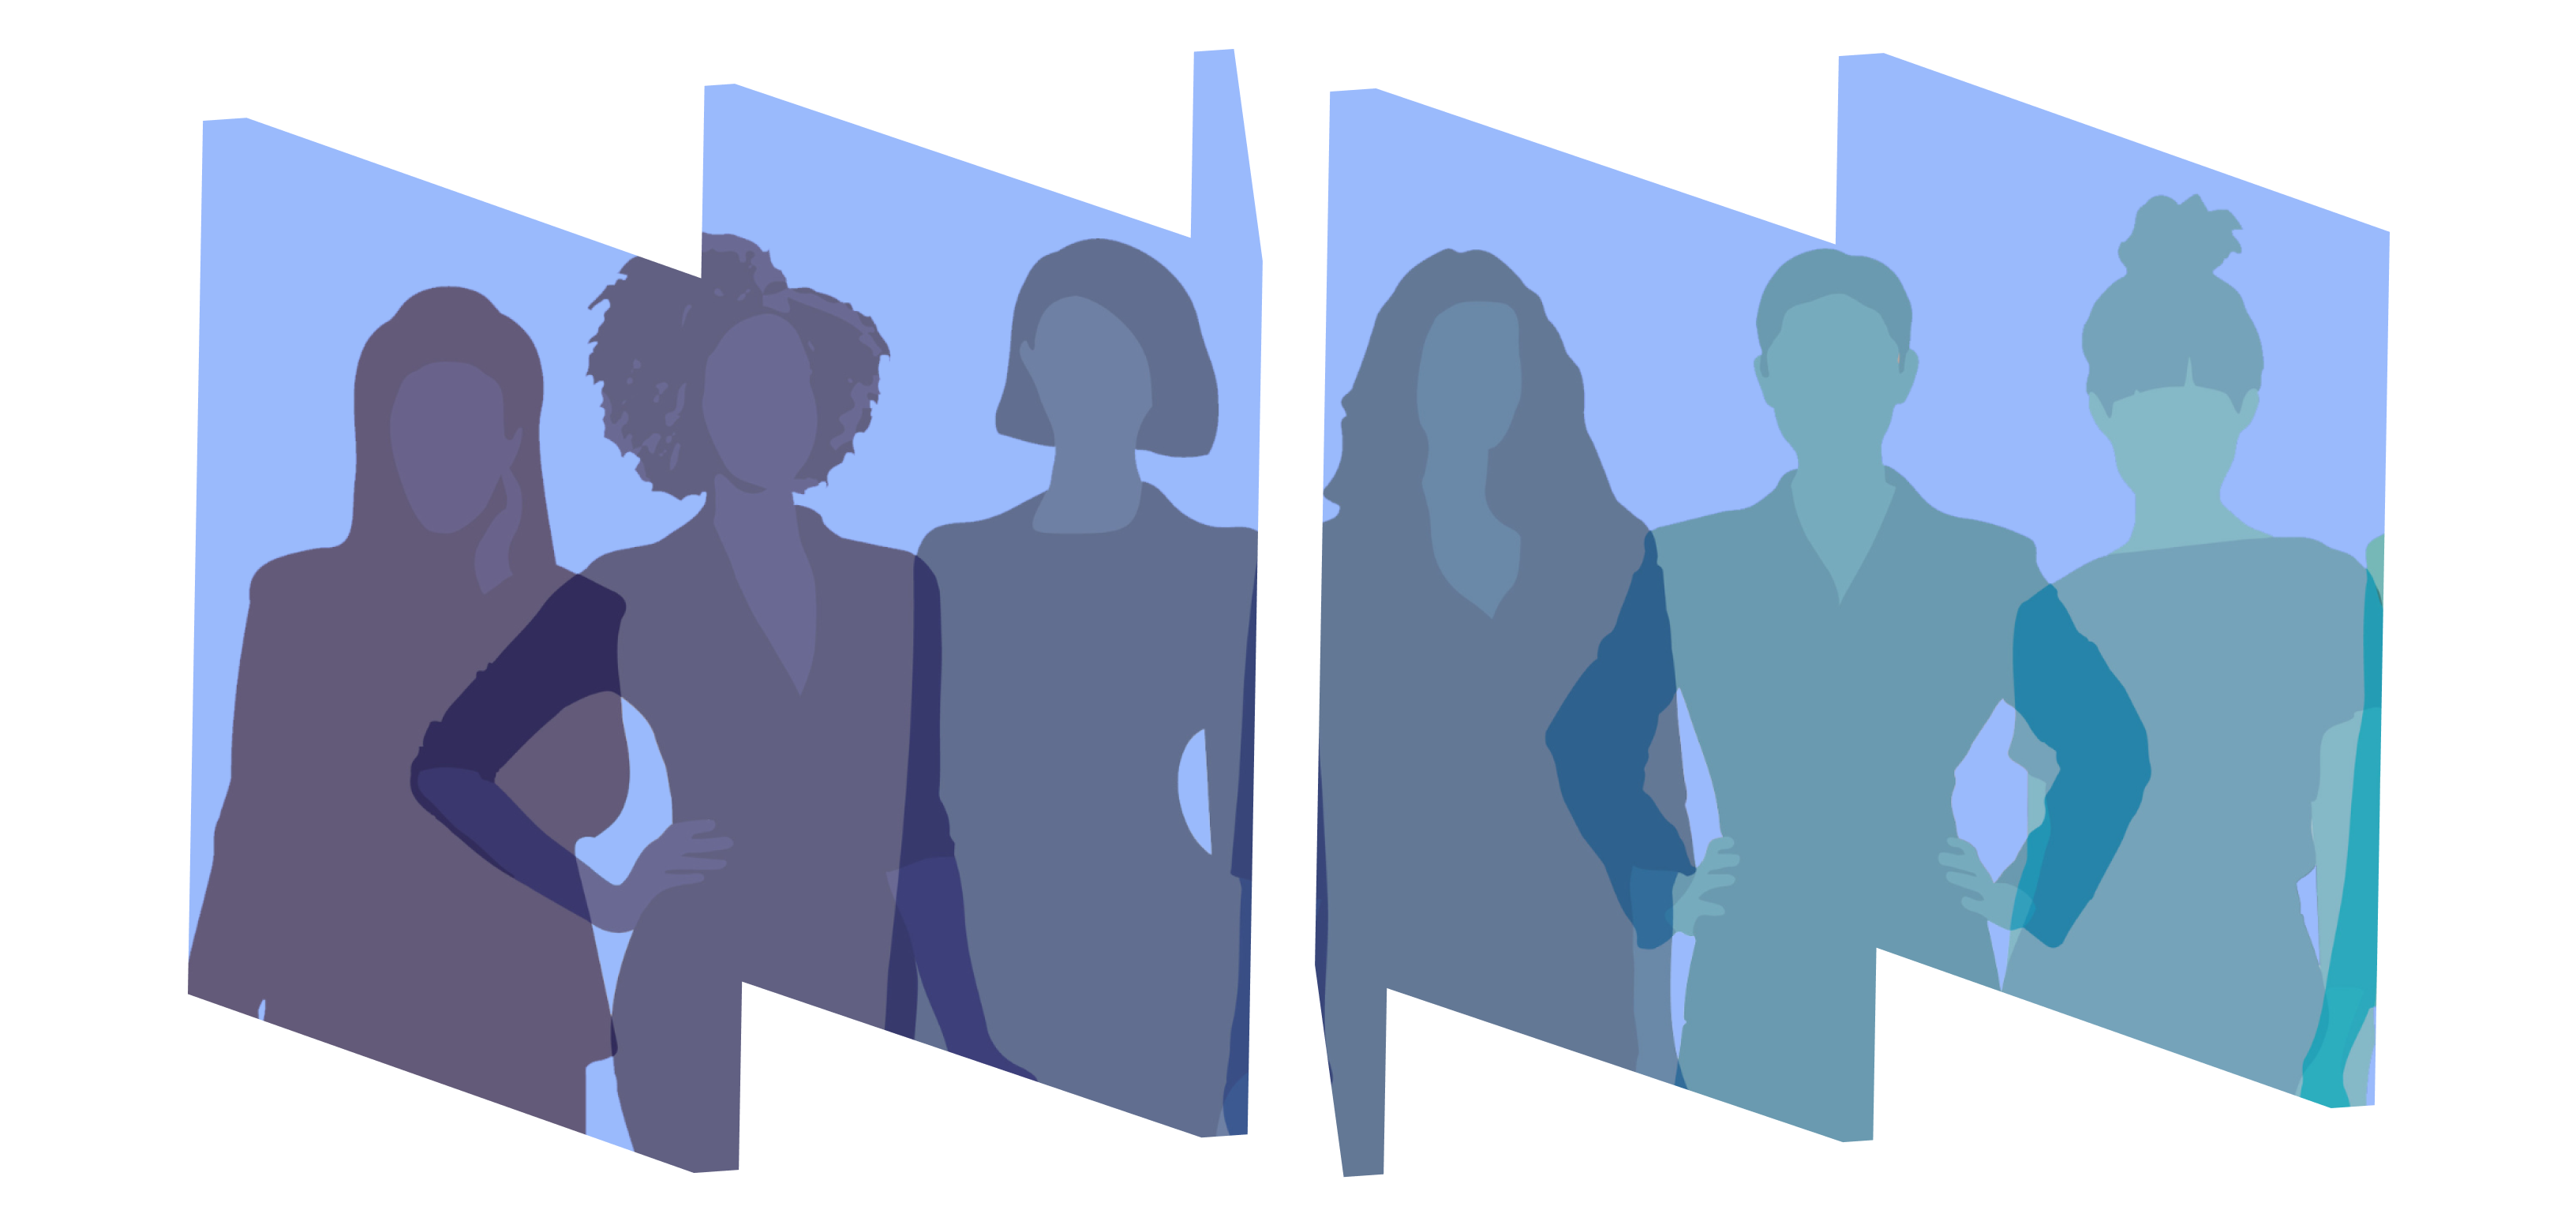 Illustration of several women in colorful silhouettes against light blue backdrop across frames of W and M.